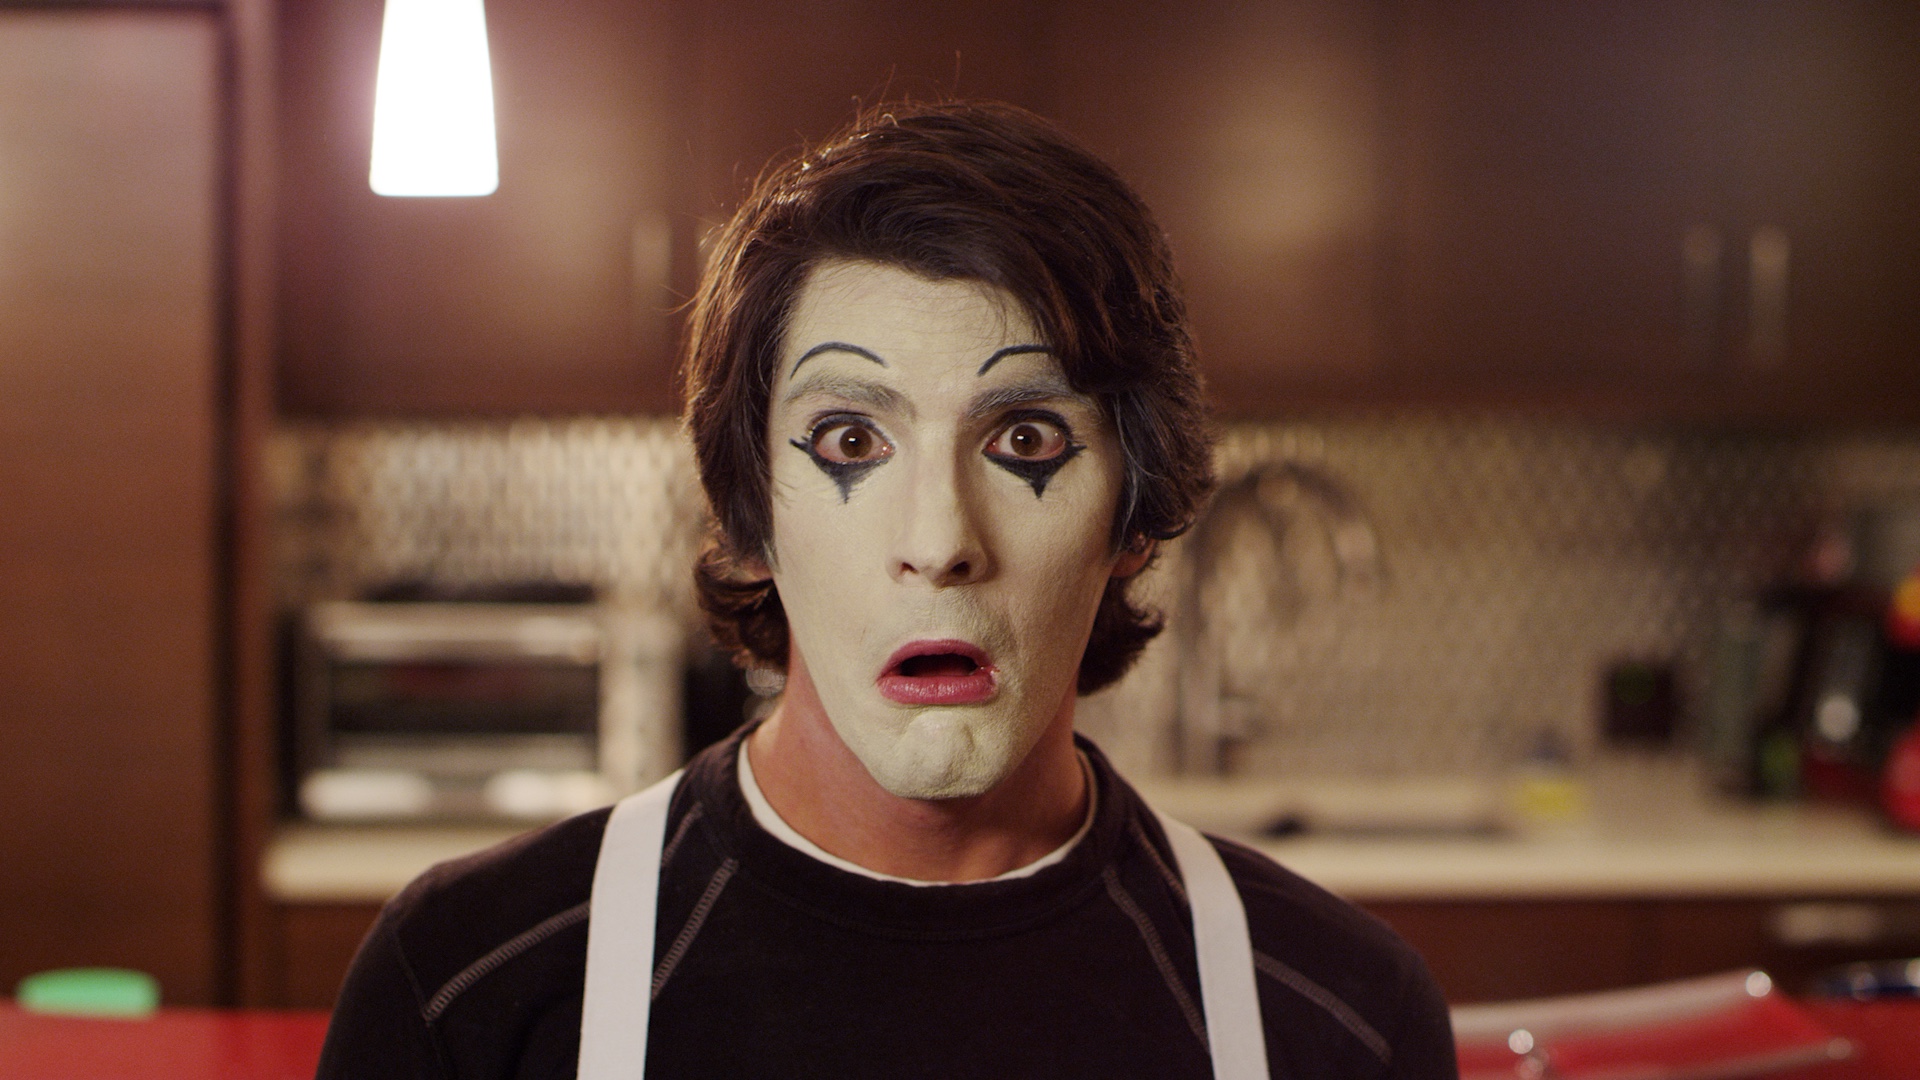 Man with mime makeup on making a shocked expression to camera.